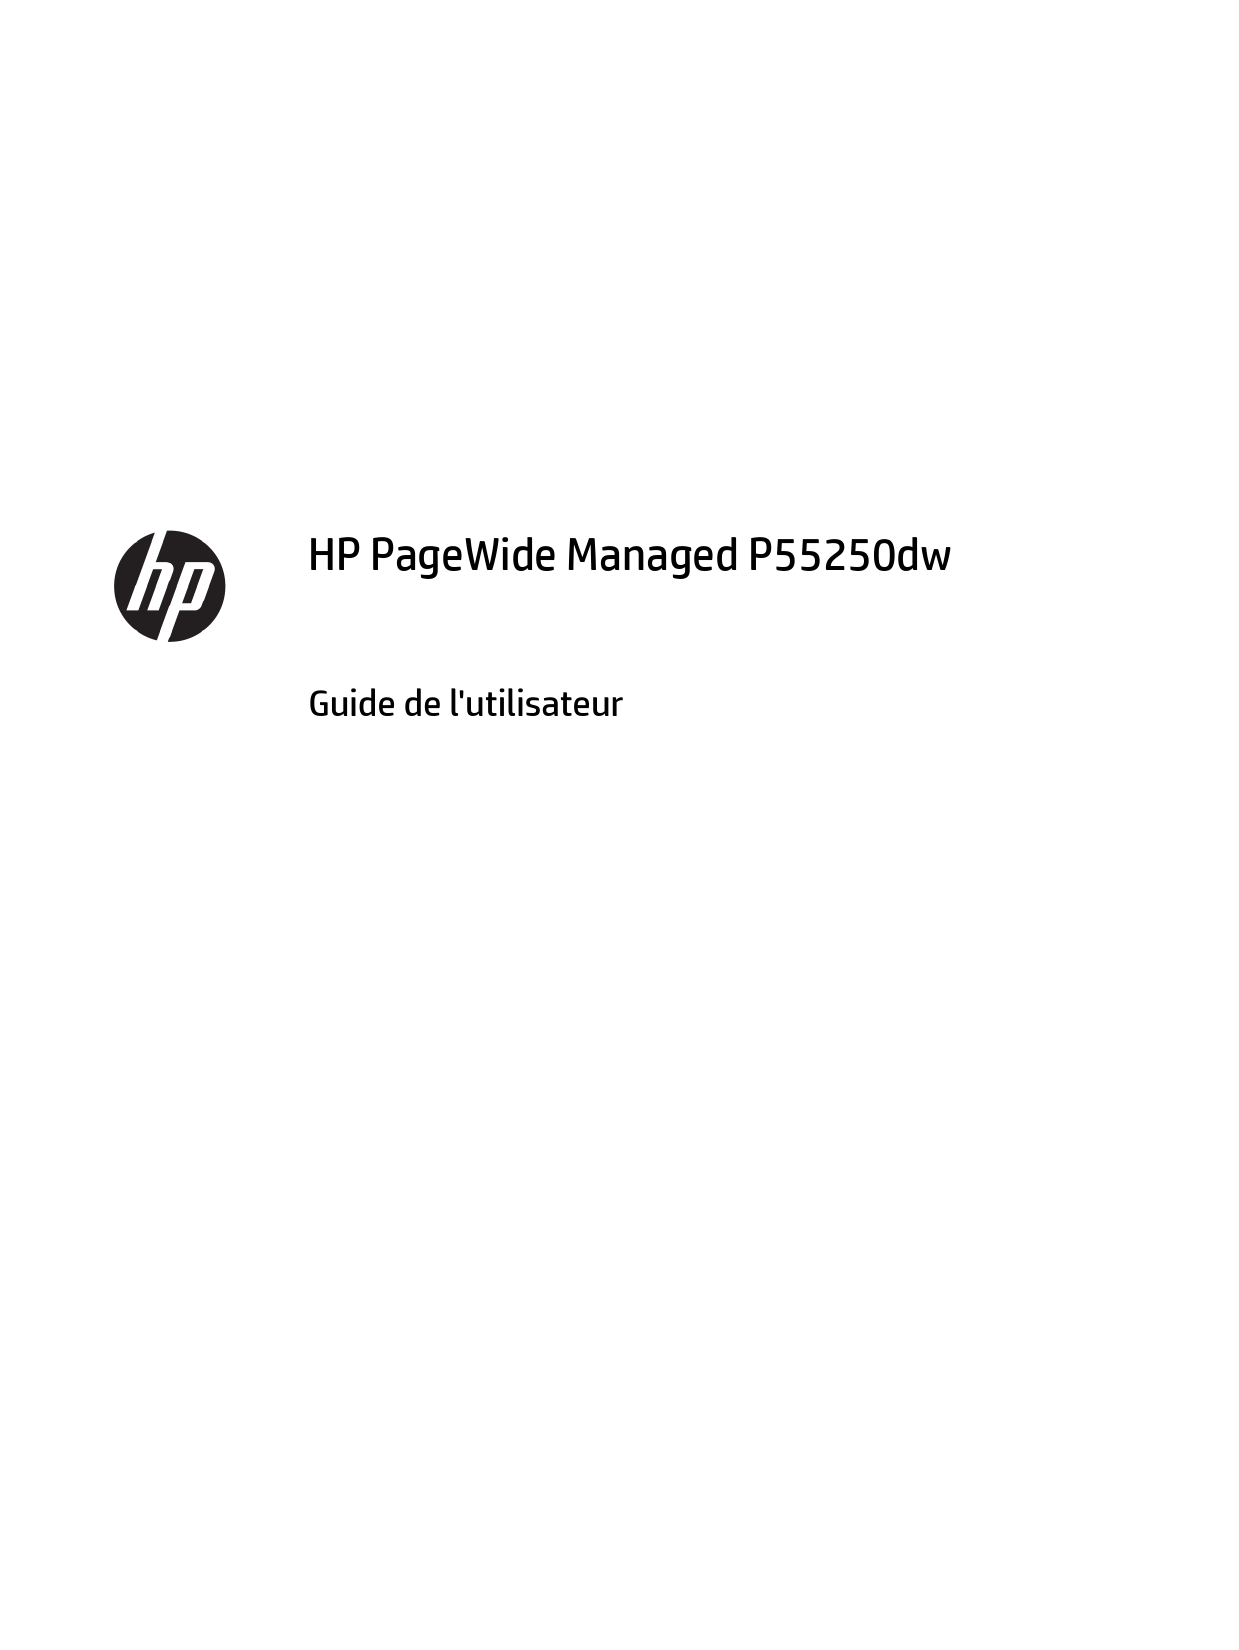 Mode d'emploi HP PAGEWIDE MANAGED P55250DW